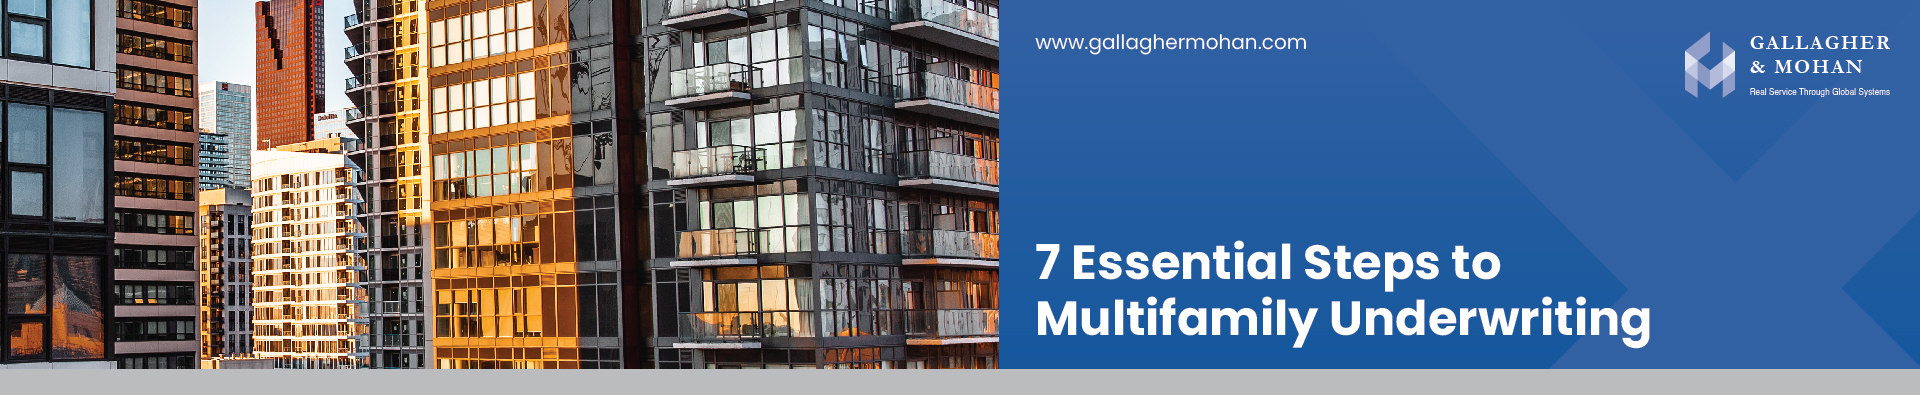 7 Essential Steps To Multifamily Underwriting